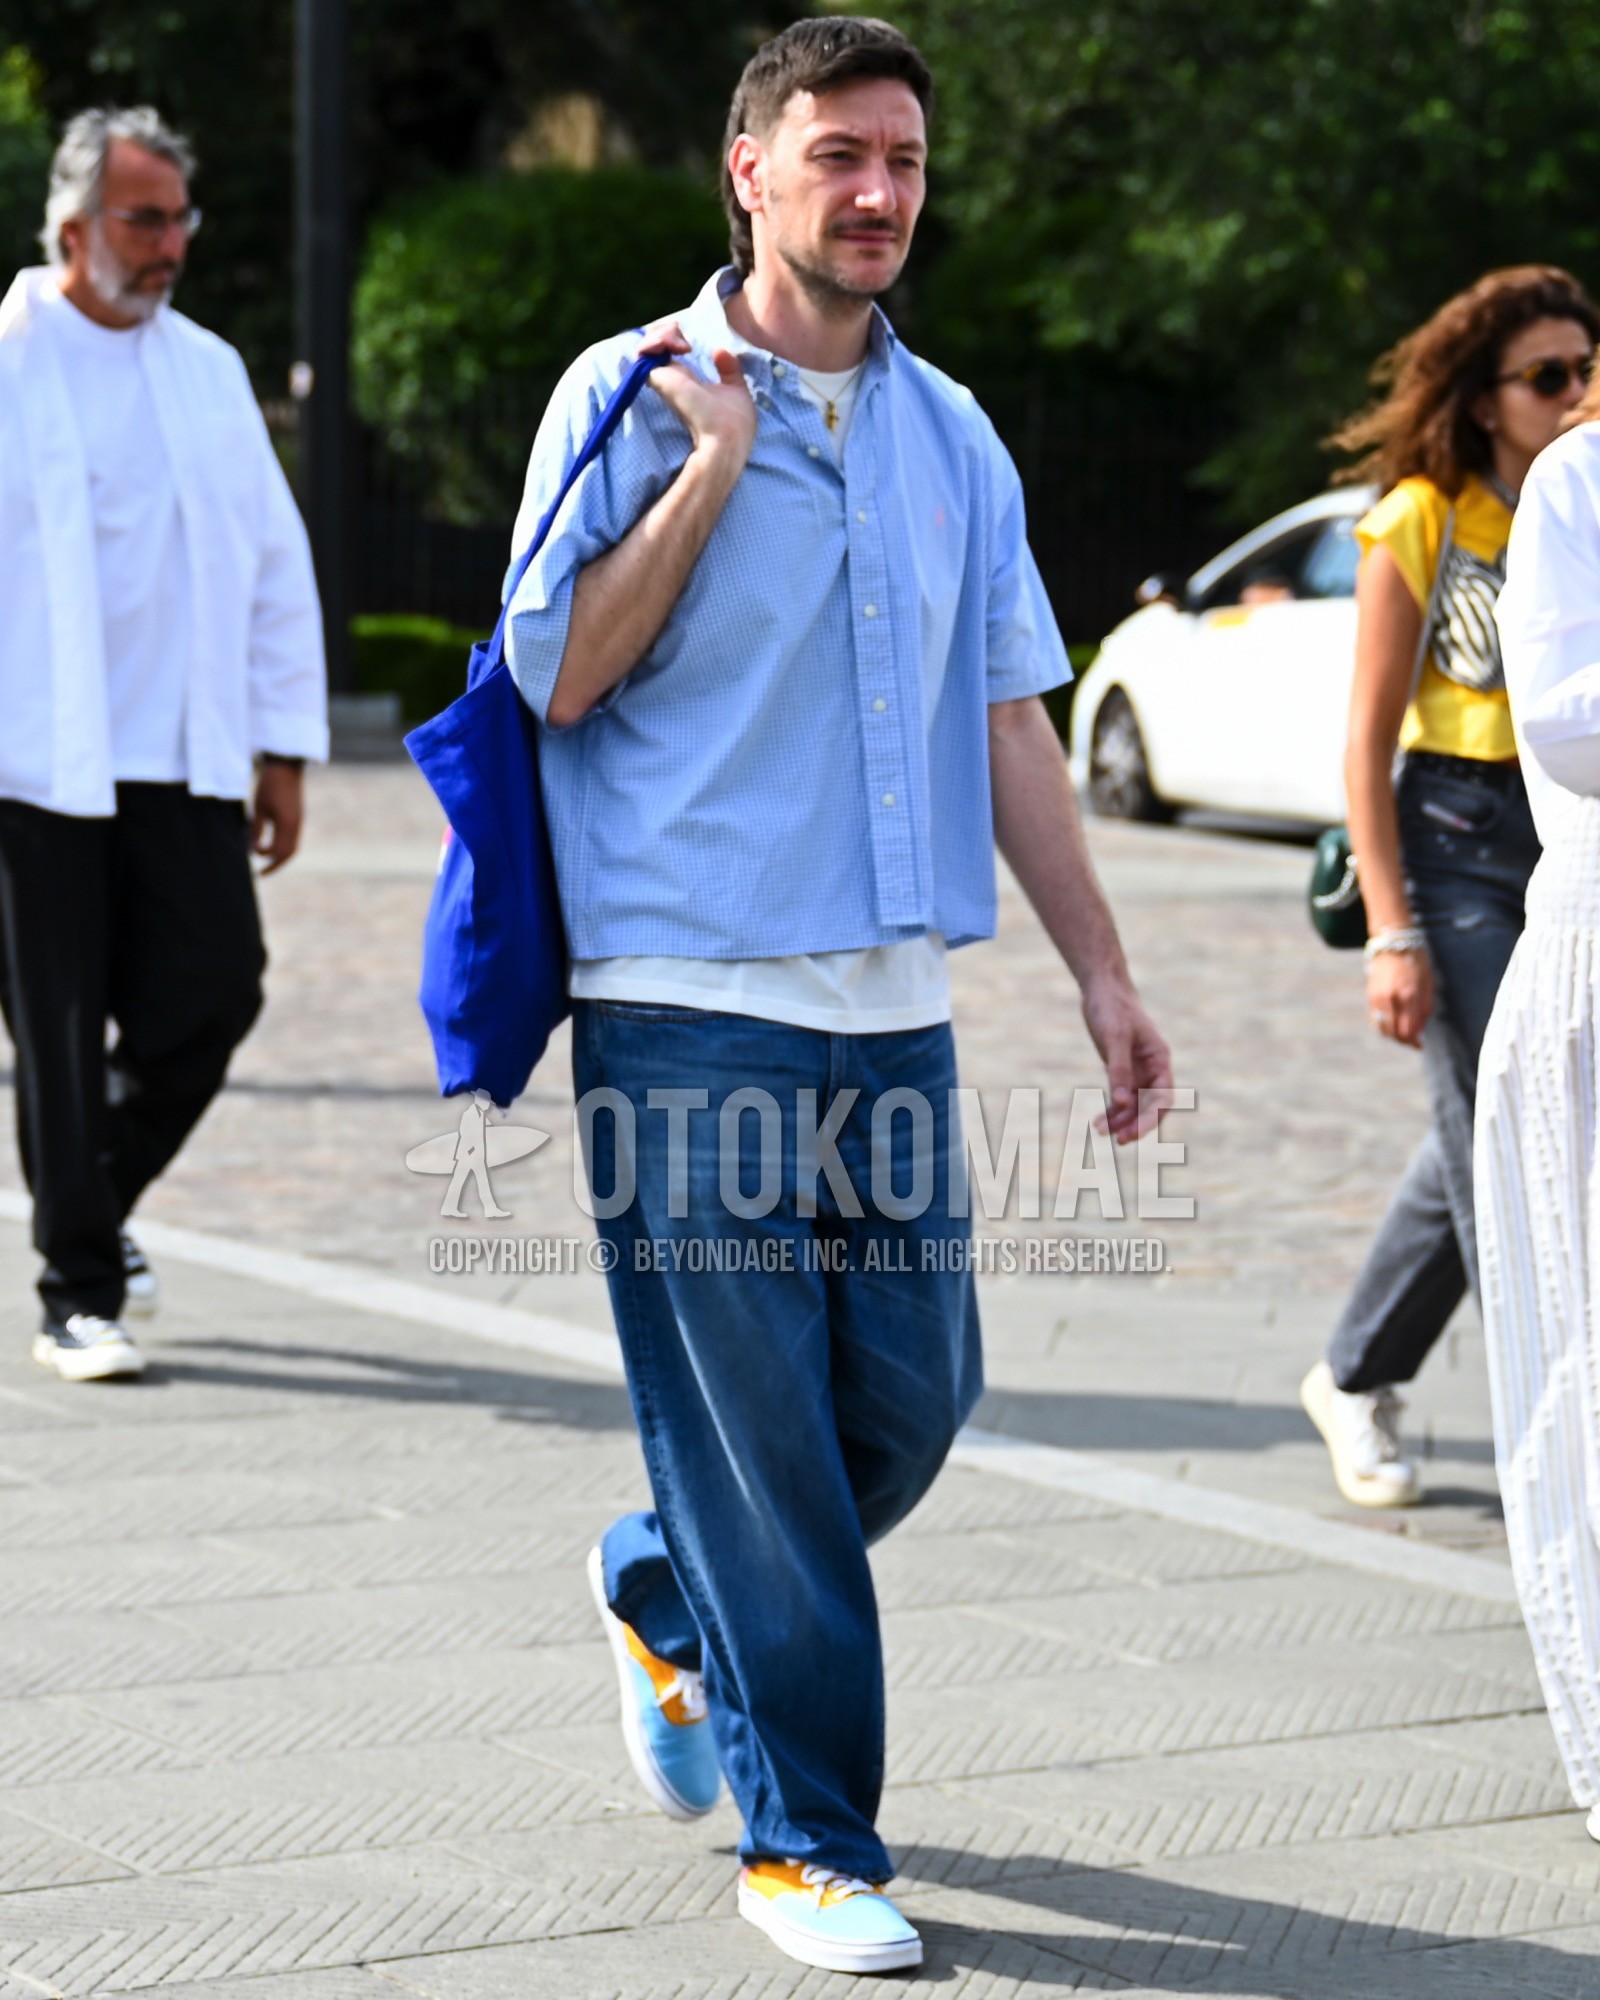 Men's spring summer autumn outfit with light blue plain shirt, white plain t-shirt, blue plain denim/jeans, light blue low-cut sneakers, blue plain tote bag.